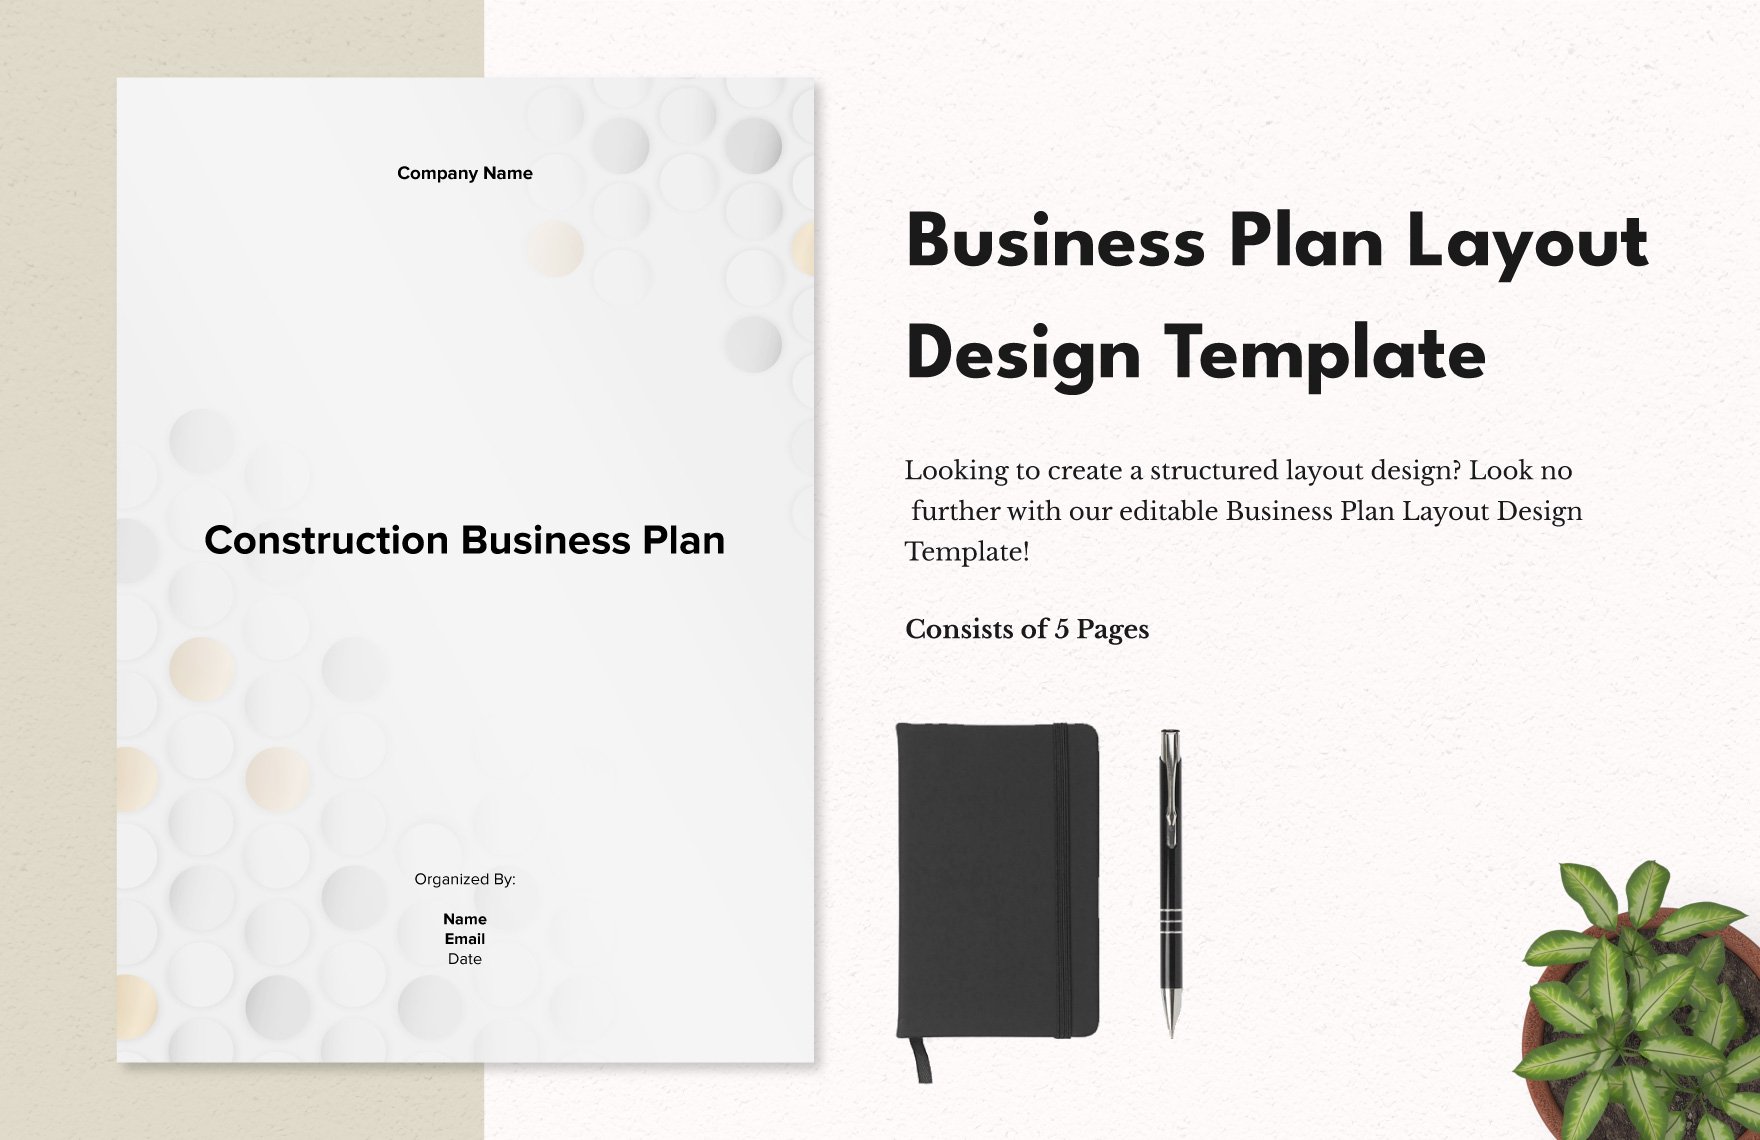 Business Plan Layout Design Template in Word, Google Docs, PDF